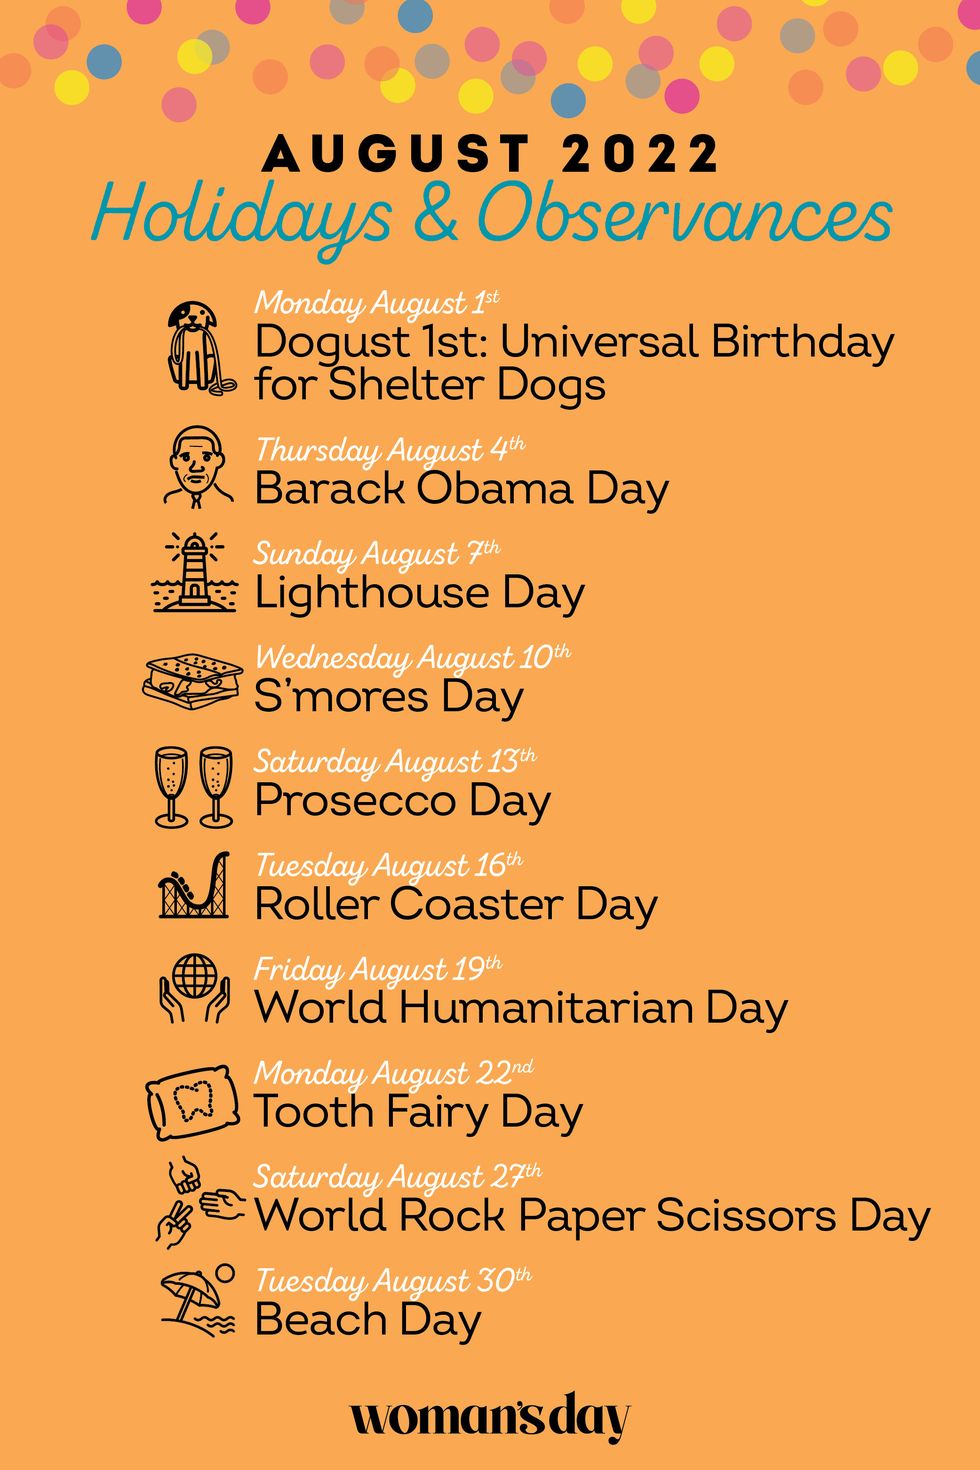 August 2022 Holidays and Observances - August Holiday Calendar